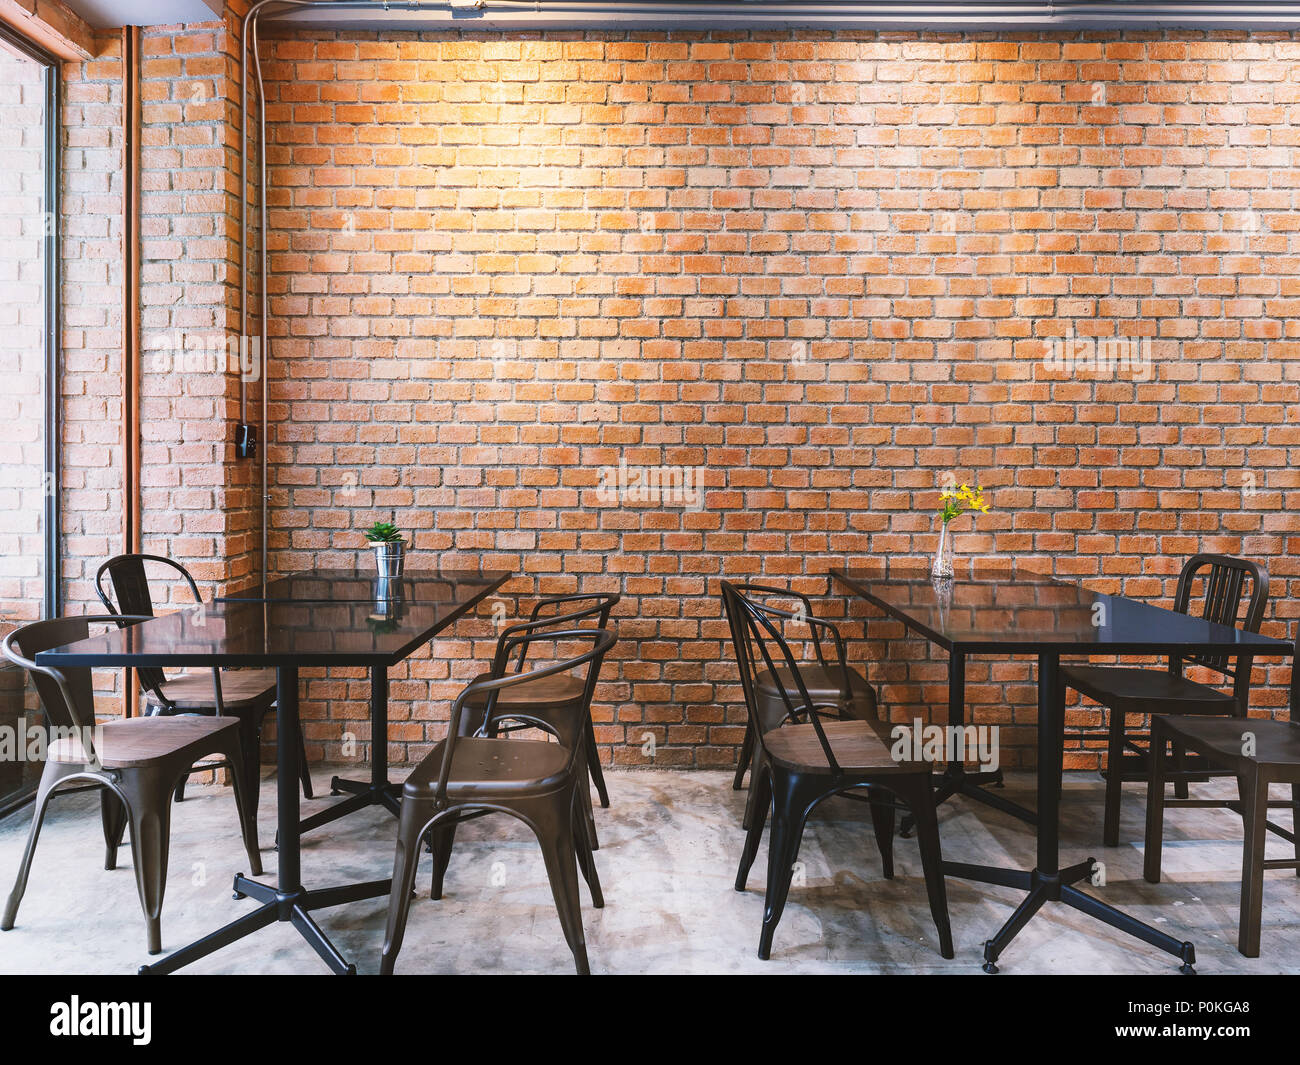 Modern cafe in loft style, black table set for coffee with brick wall